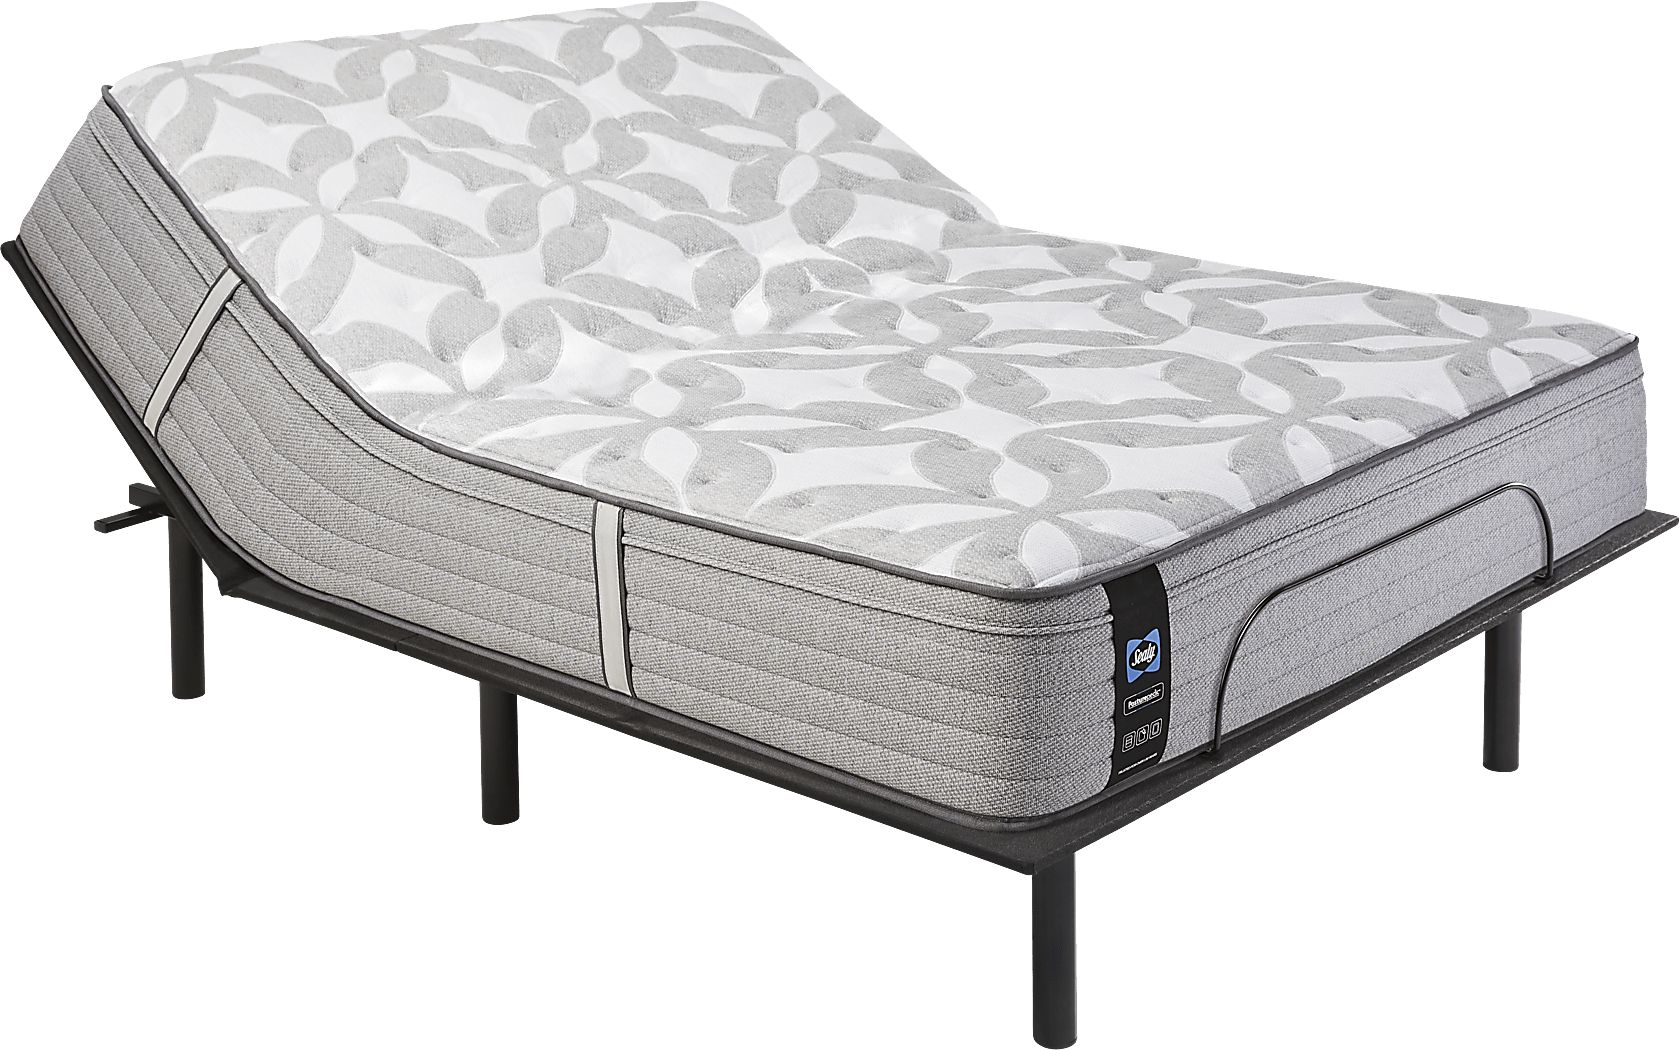 sealy posturepedic cooling comfort king mattress cover reviews